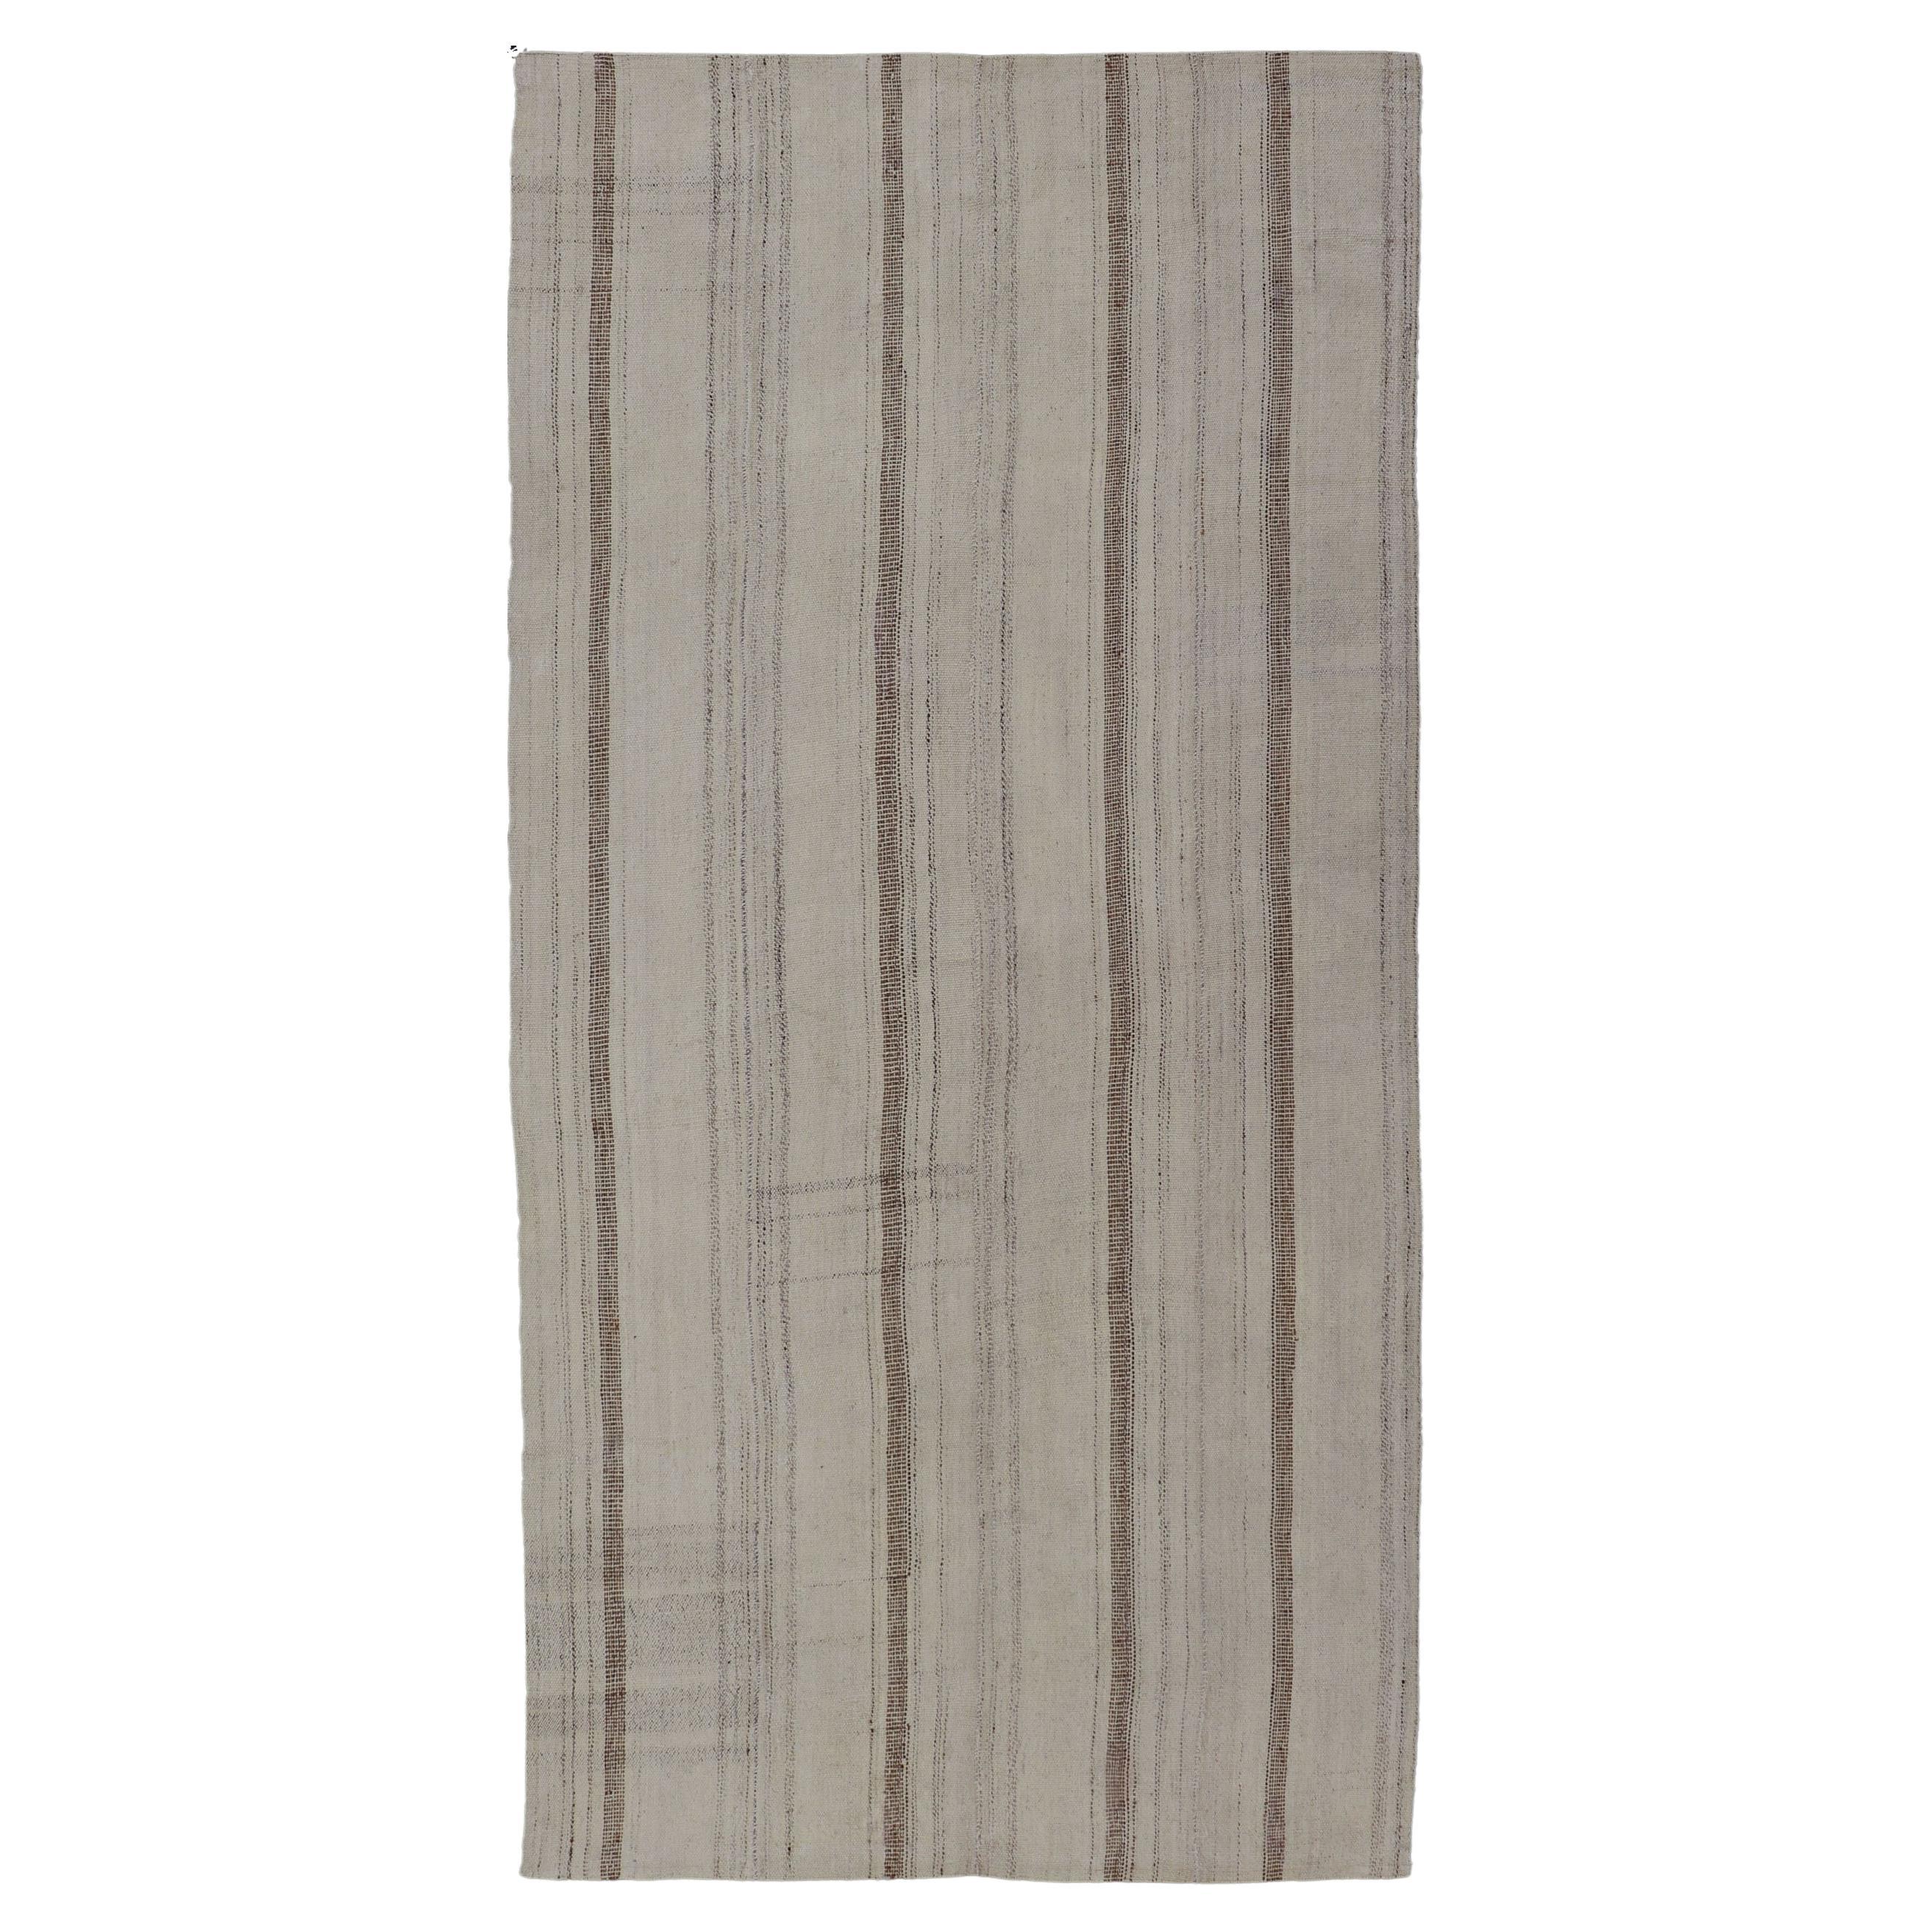 Vintage Hand Woven Turkish Kilim with Stripes in Taupe, Cream & Brown For Sale